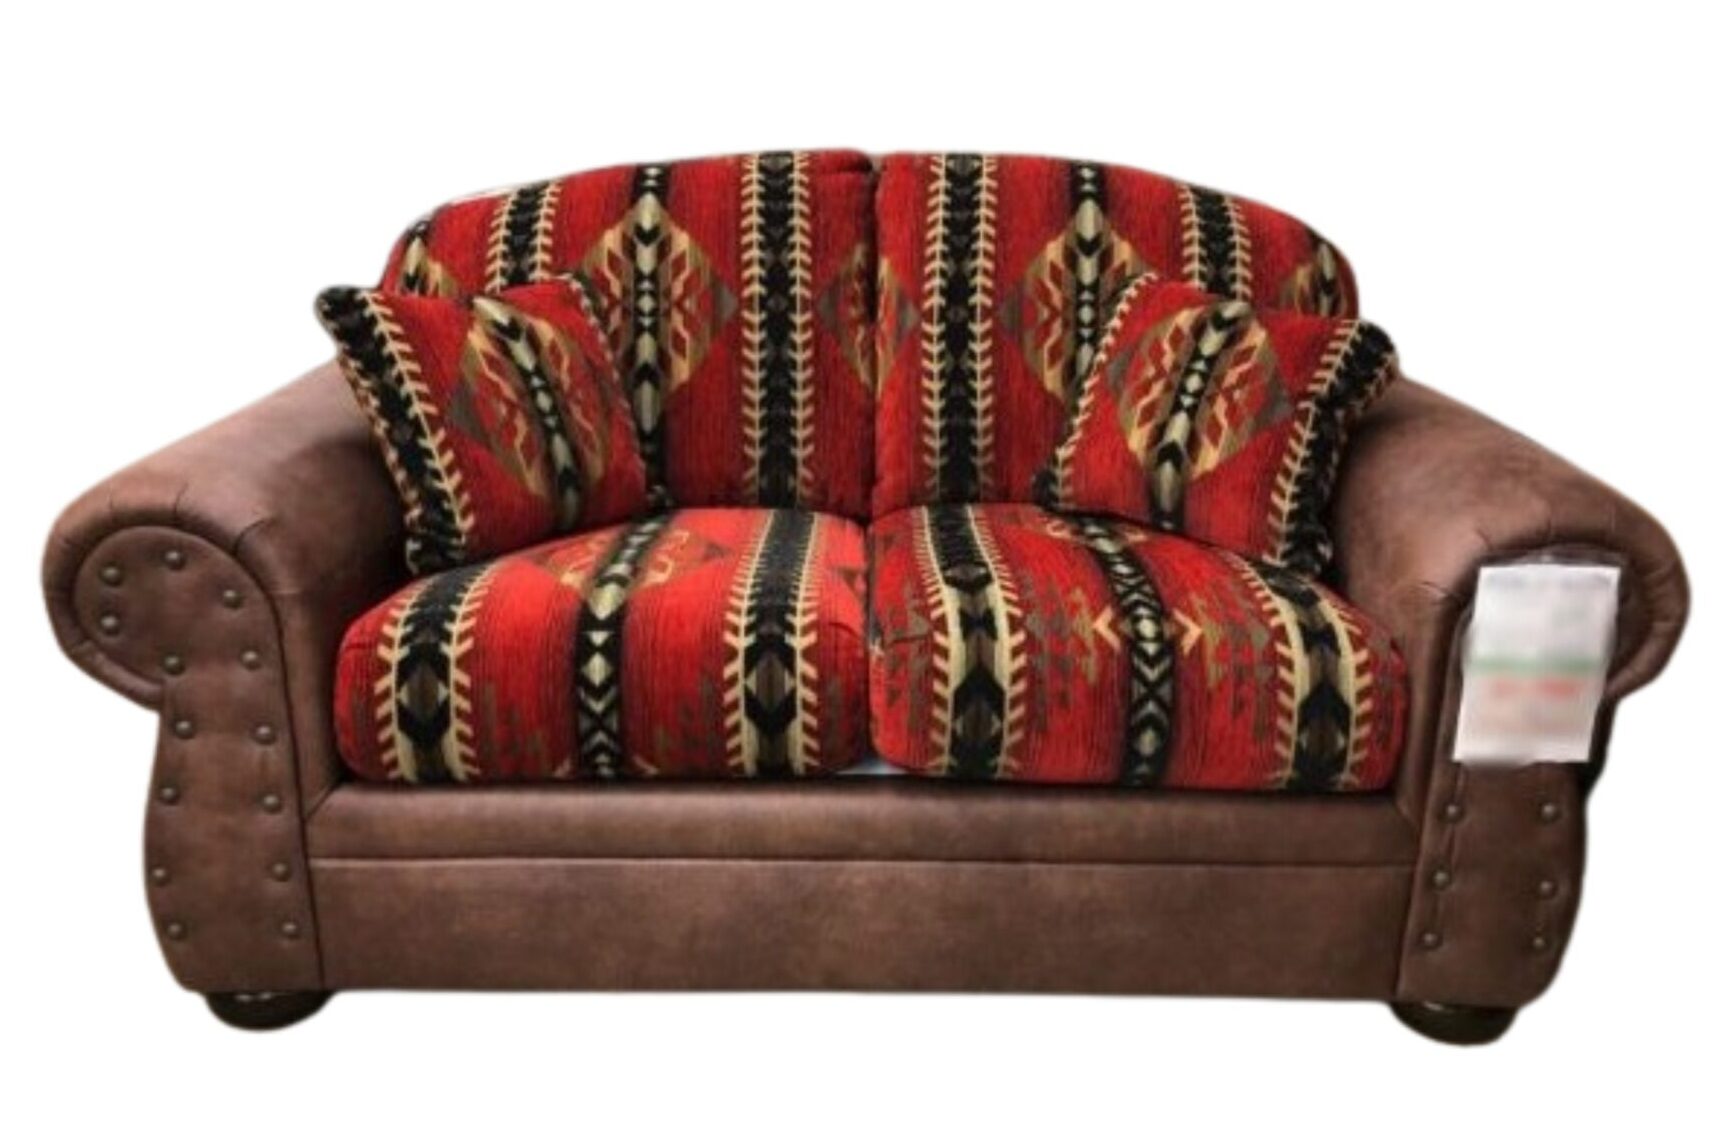 Arbuckle Loveseat W/Nails